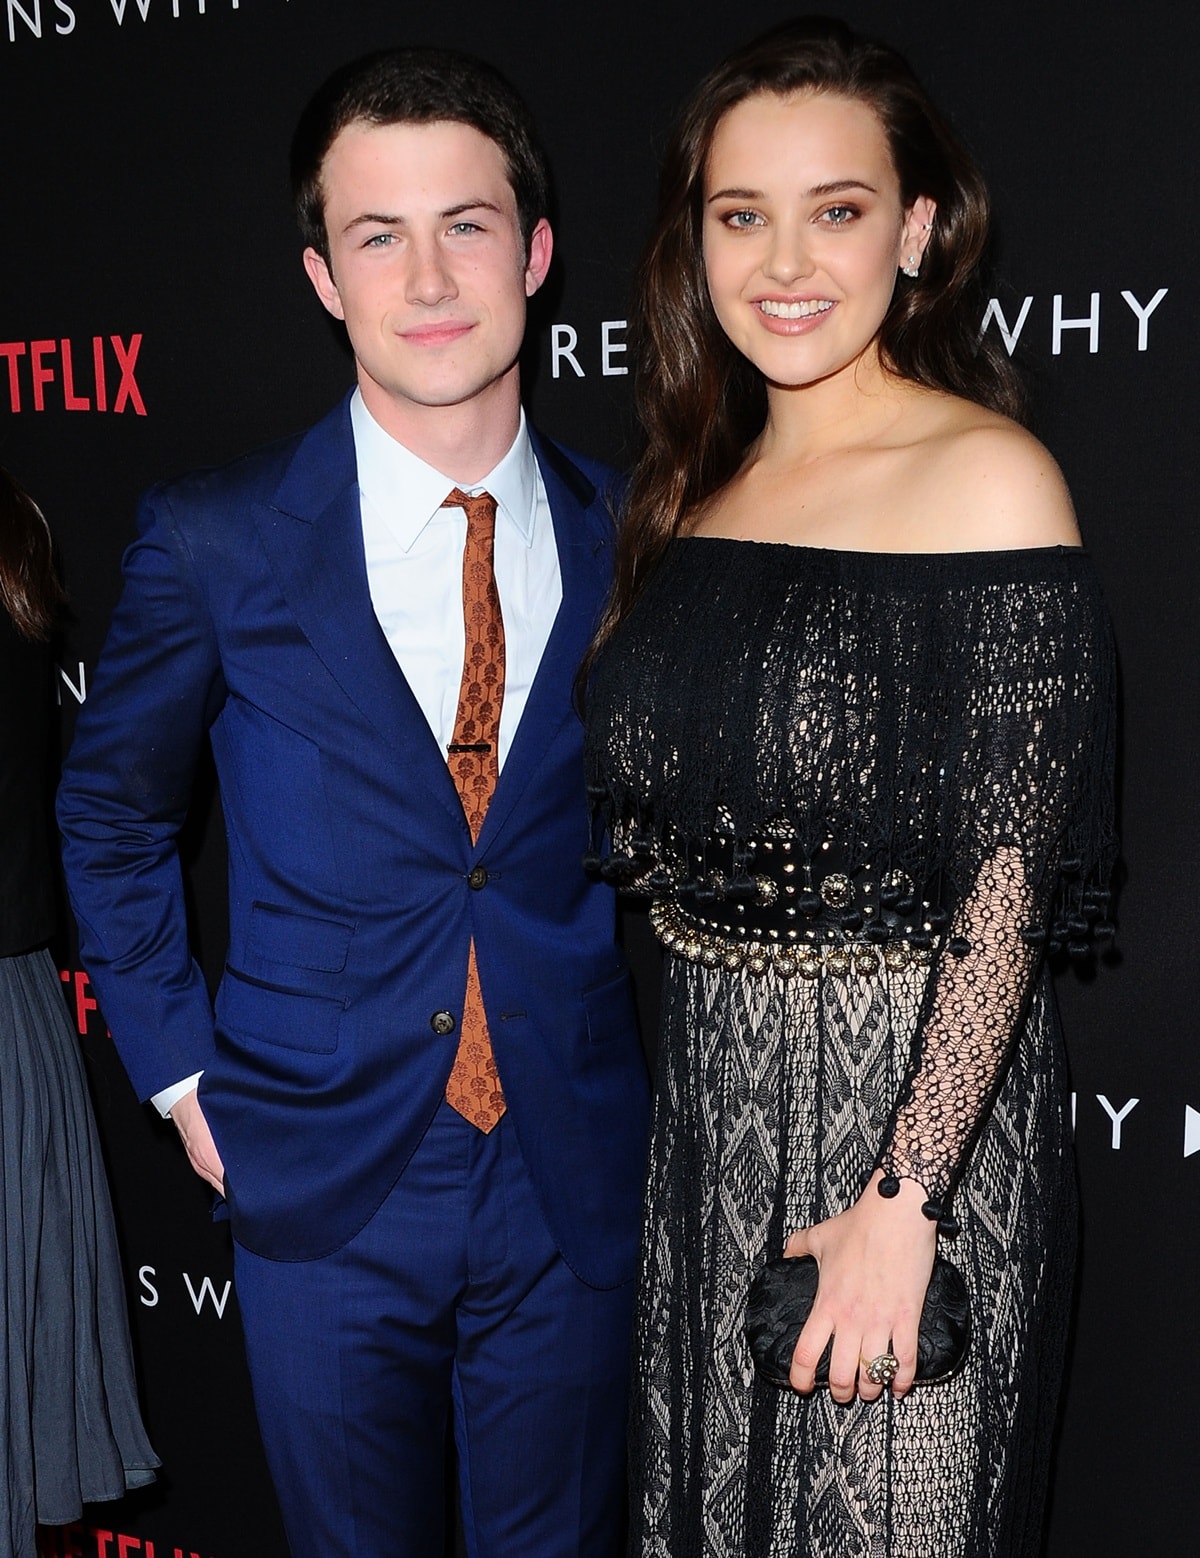 Dylan Minnette is taller than Katherine Langford, with a height of 5 feet 7 ½ inches (171.5 cm) compared to Katherine Langford's height of 5 feet 5 inches (165.1 cm) (Credit: Sara De Boer / Startraksphoto)